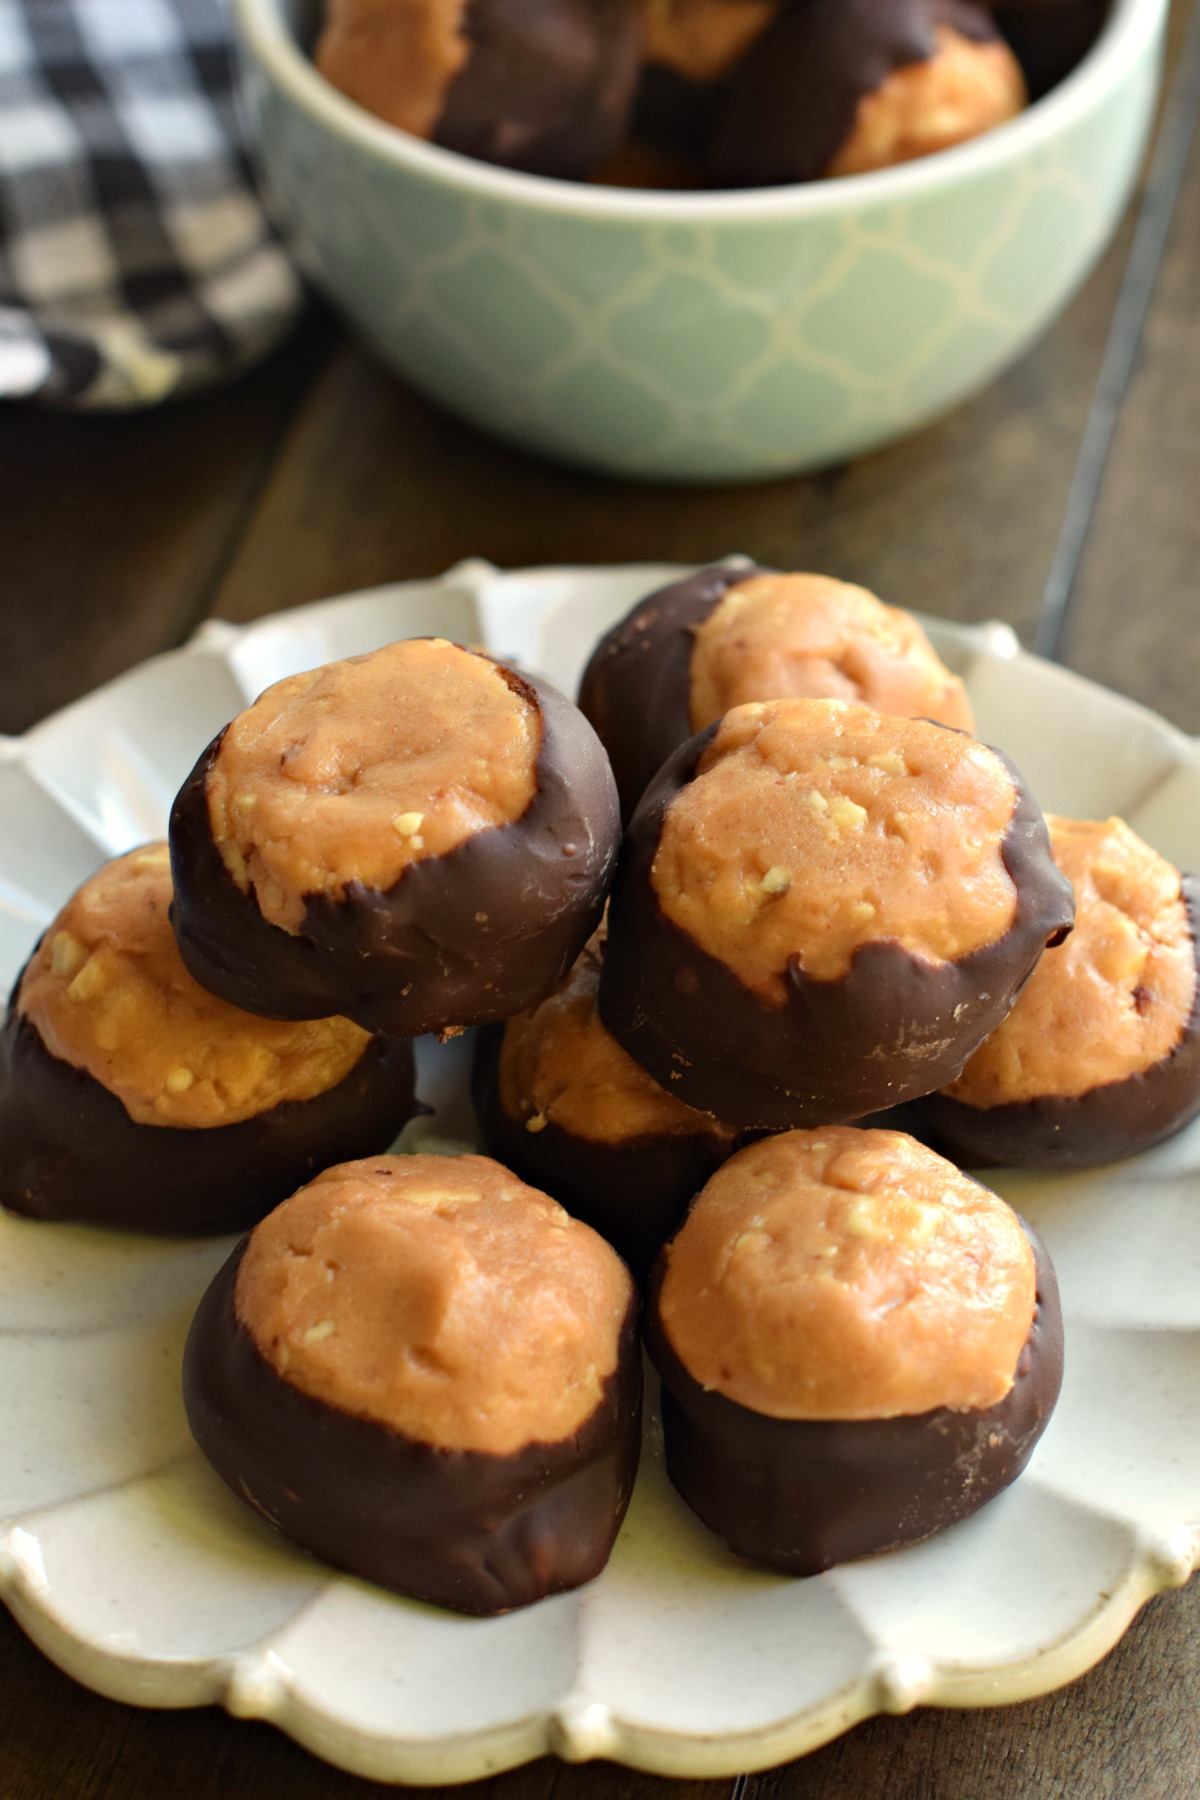 Low carb peanut butter buckeyes on a plate.